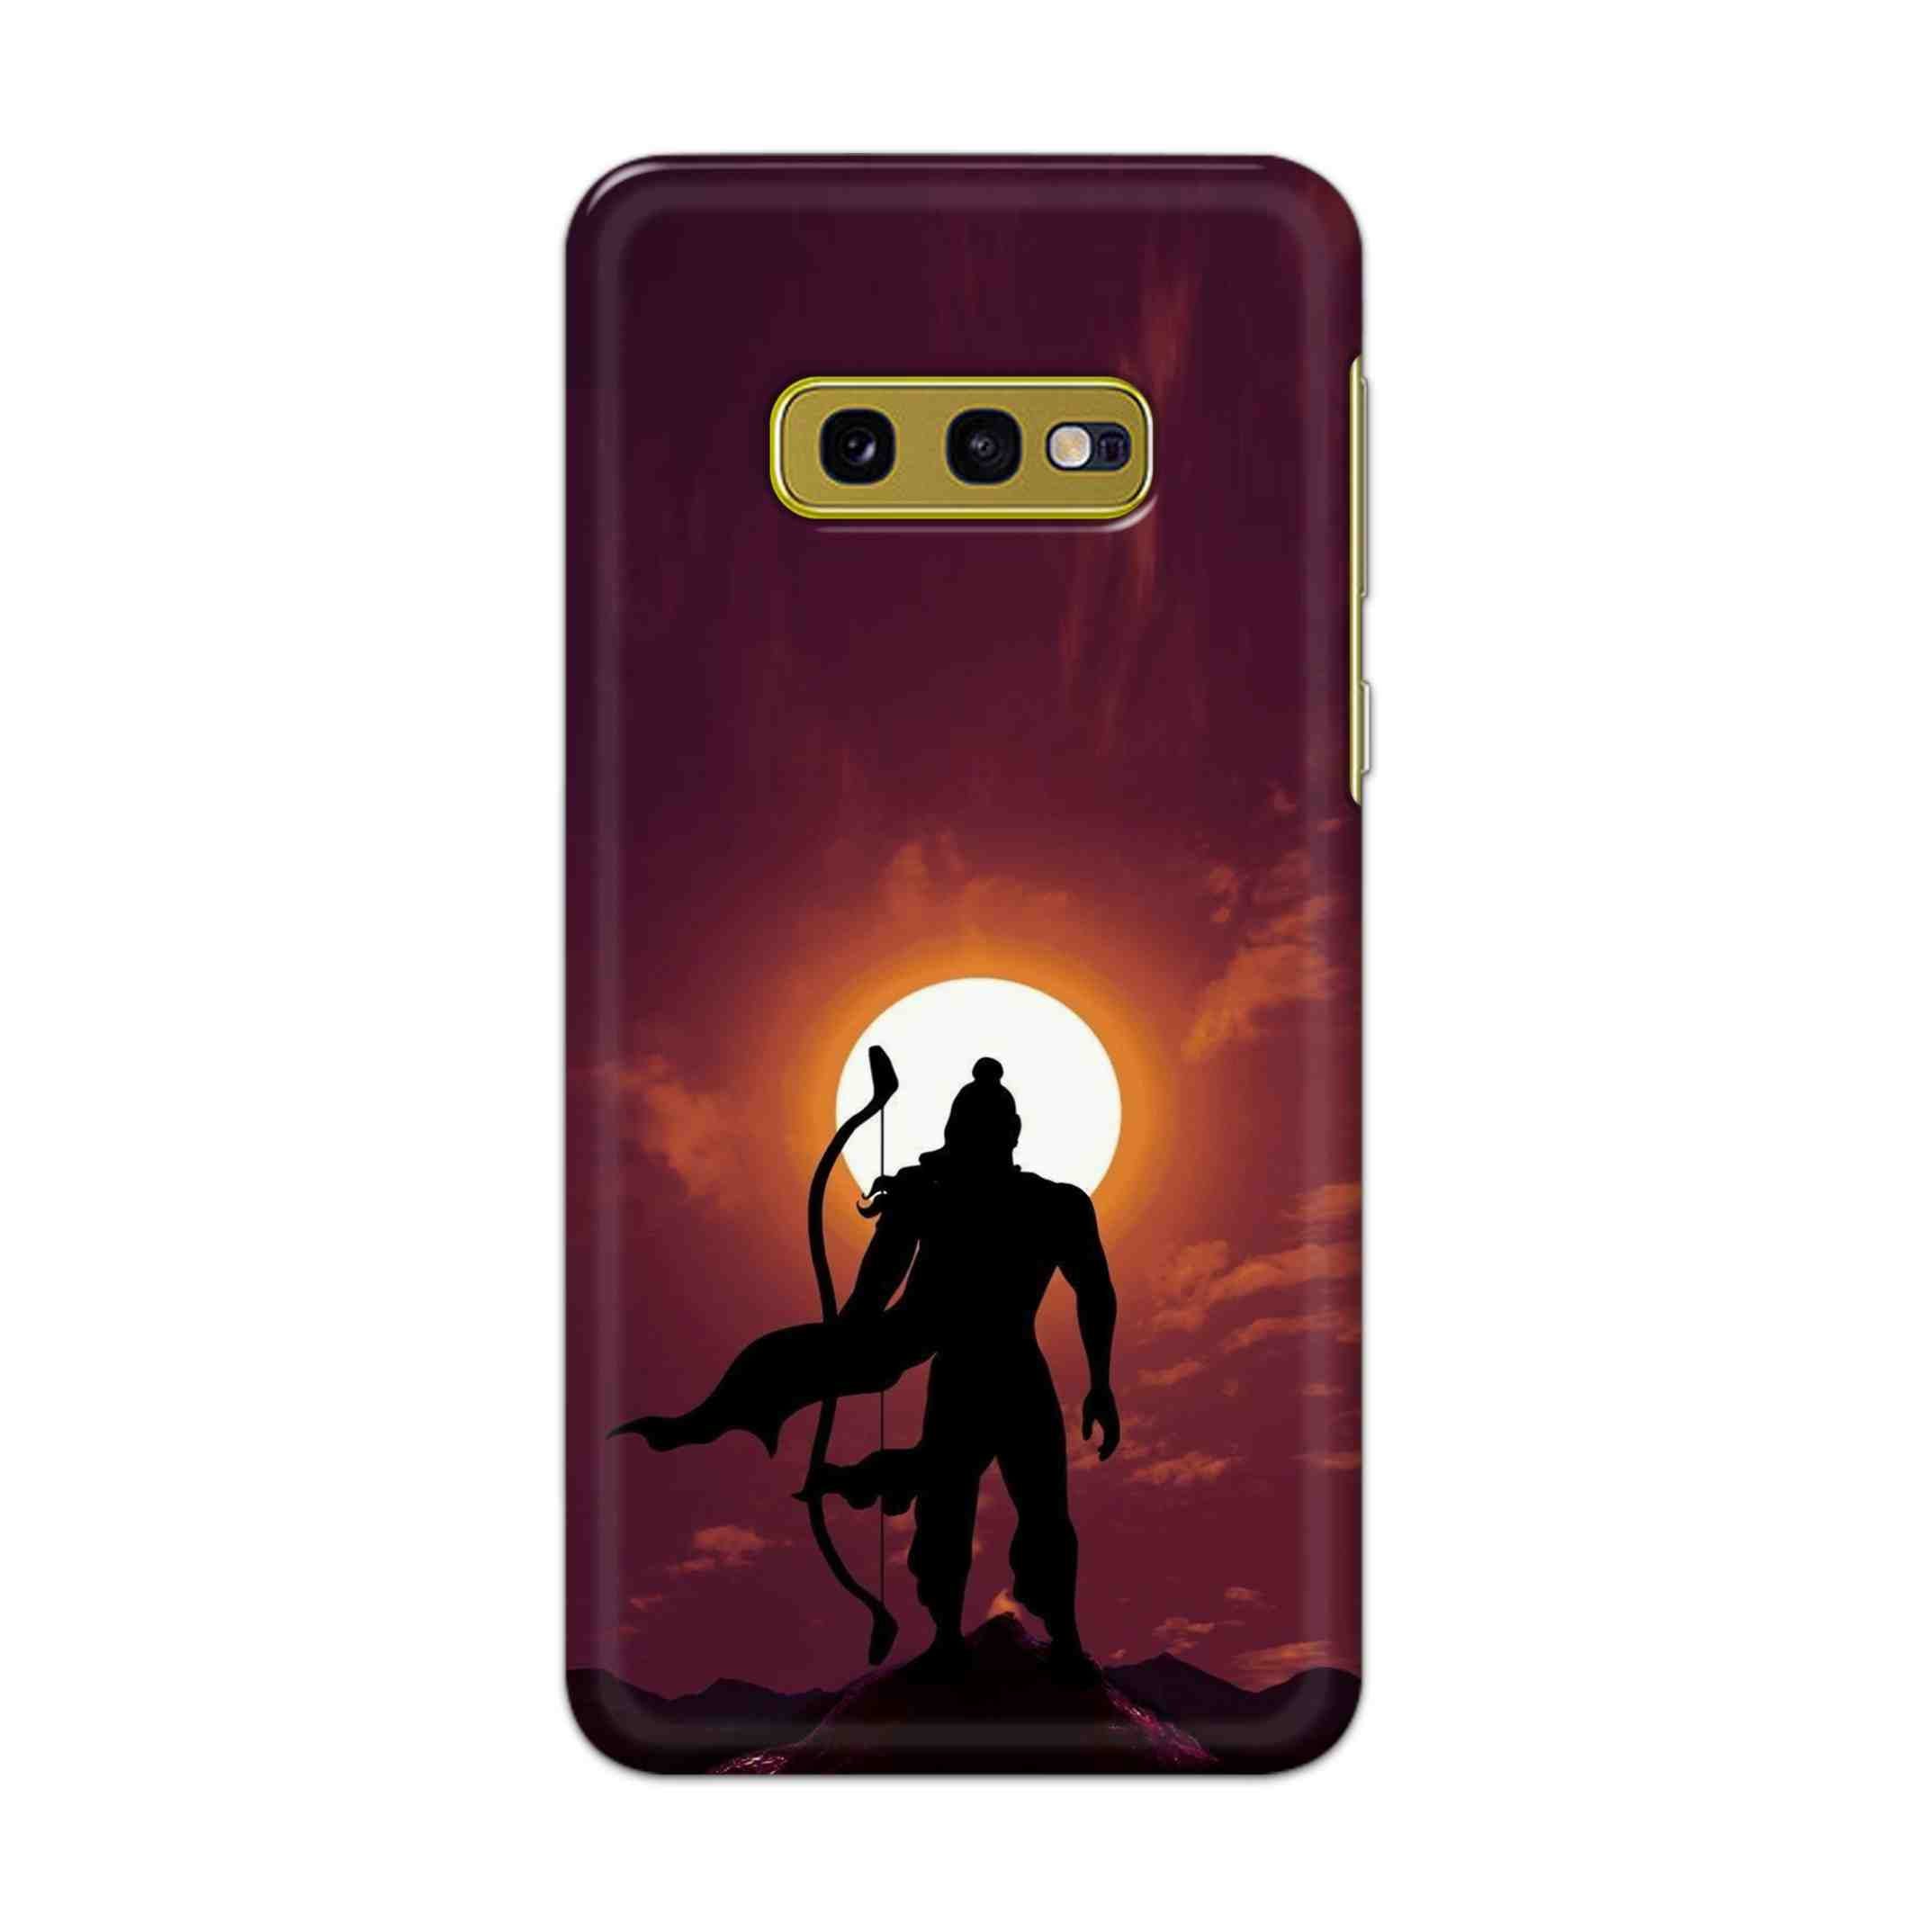 Buy Ram Hard Back Mobile Phone Case Cover For Samsung Galaxy S10e Online